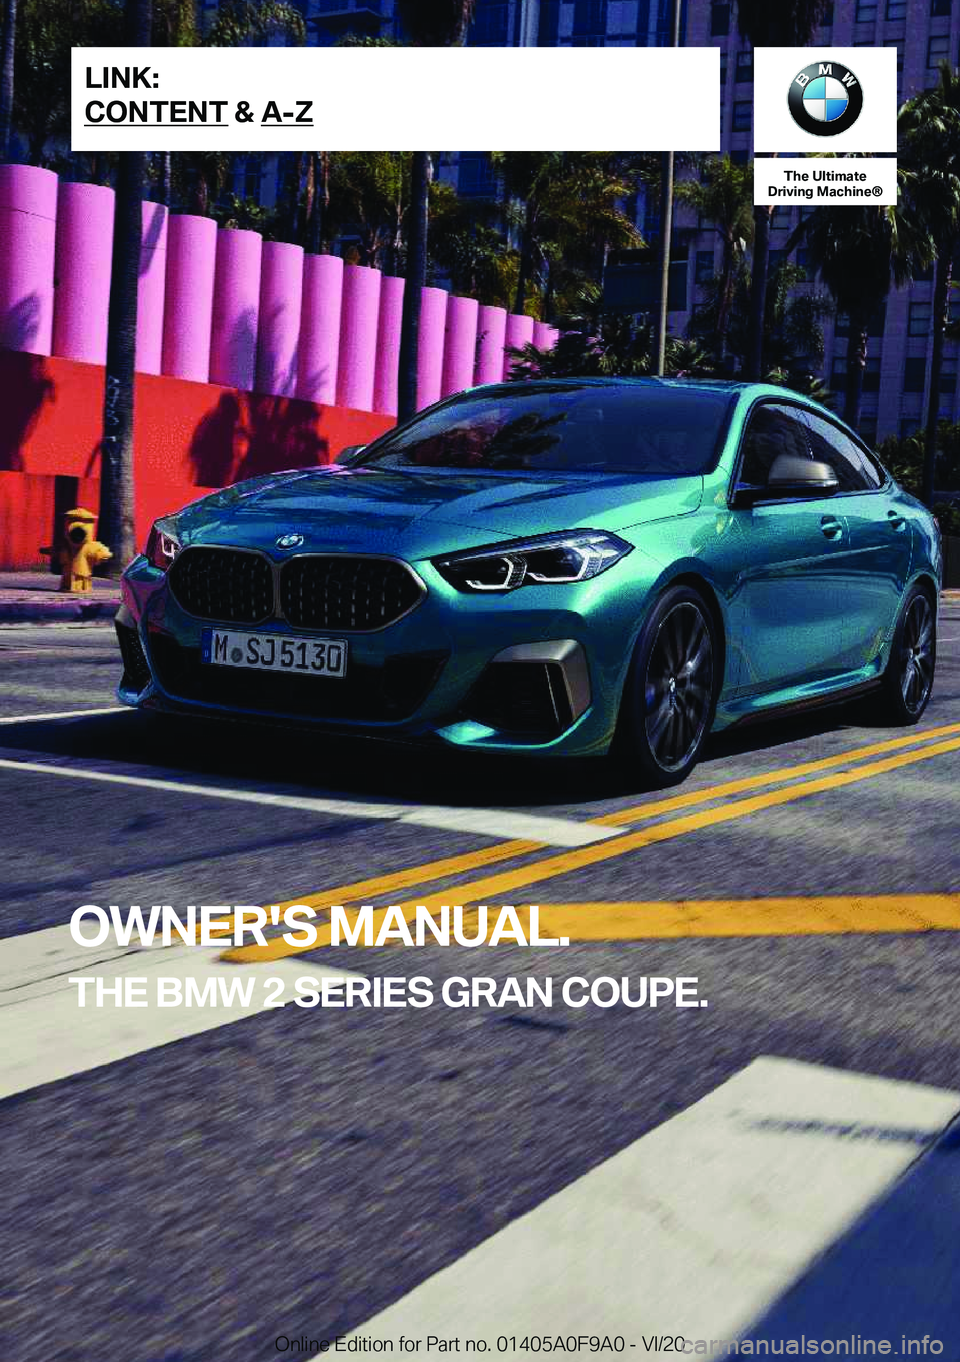 BMW 2 SERIES GRAN COUPE 2021  Owners Manual �T�h�e��U�l�t�i�m�a�t�e
�D�r�i�v�i�n�g��M�a�c�h�i�n�e�n
�O�W�N�E�R�'�S��M�A�N�U�A�L�.
�T�H�E��B�M�W��2��S�E�R�I�E�S��G�R�A�N��C�O�U�P�E�.�L�I�N�K�:
�C�O�N�T�E�N�T��&��A�-�Z�O�n�l�i�n�e�